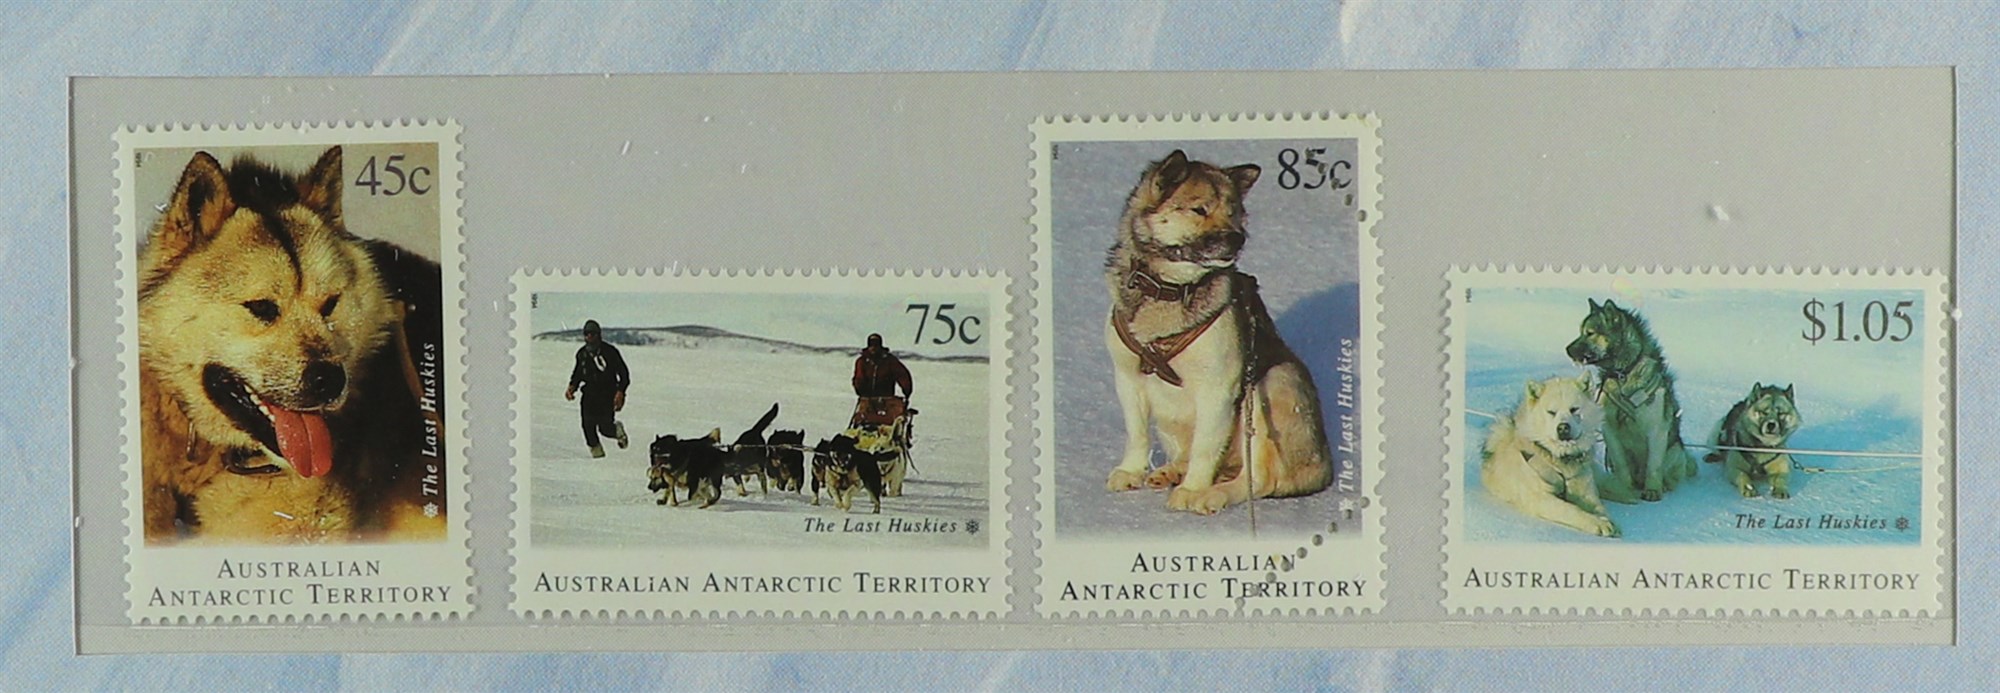 AUSTRALIAN ANT.TERR 1994 Departure of Huskies from Antarctica set, the 85c value with printers - Image 3 of 3